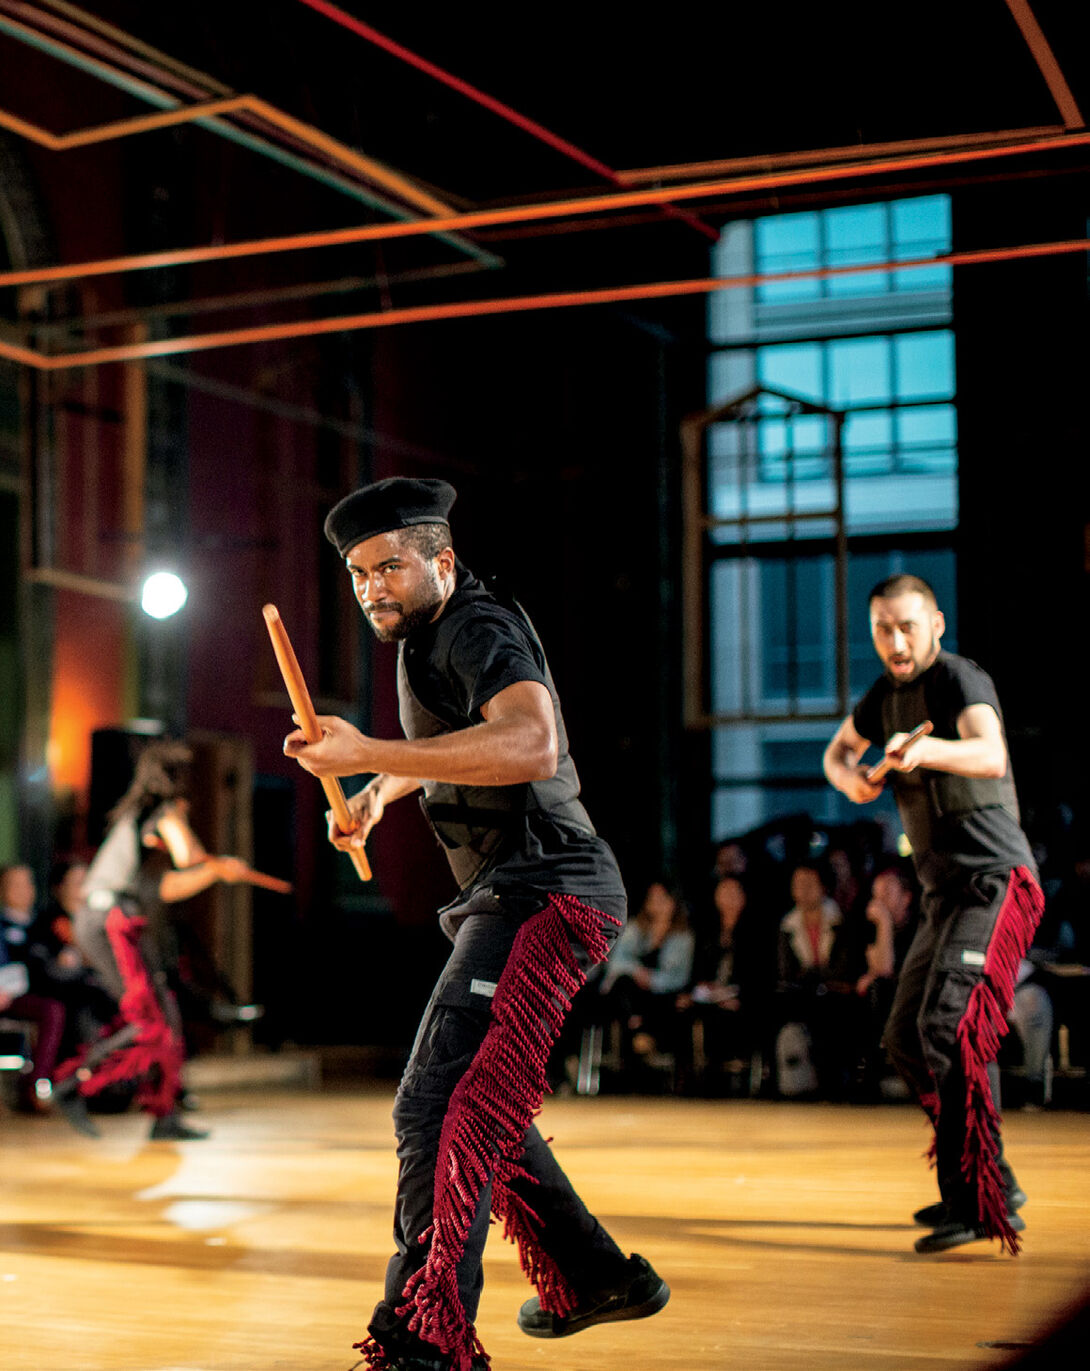 Jefferson Pinder, This Is Not a Drill, 2019, performance at the Chicago Cultural Center